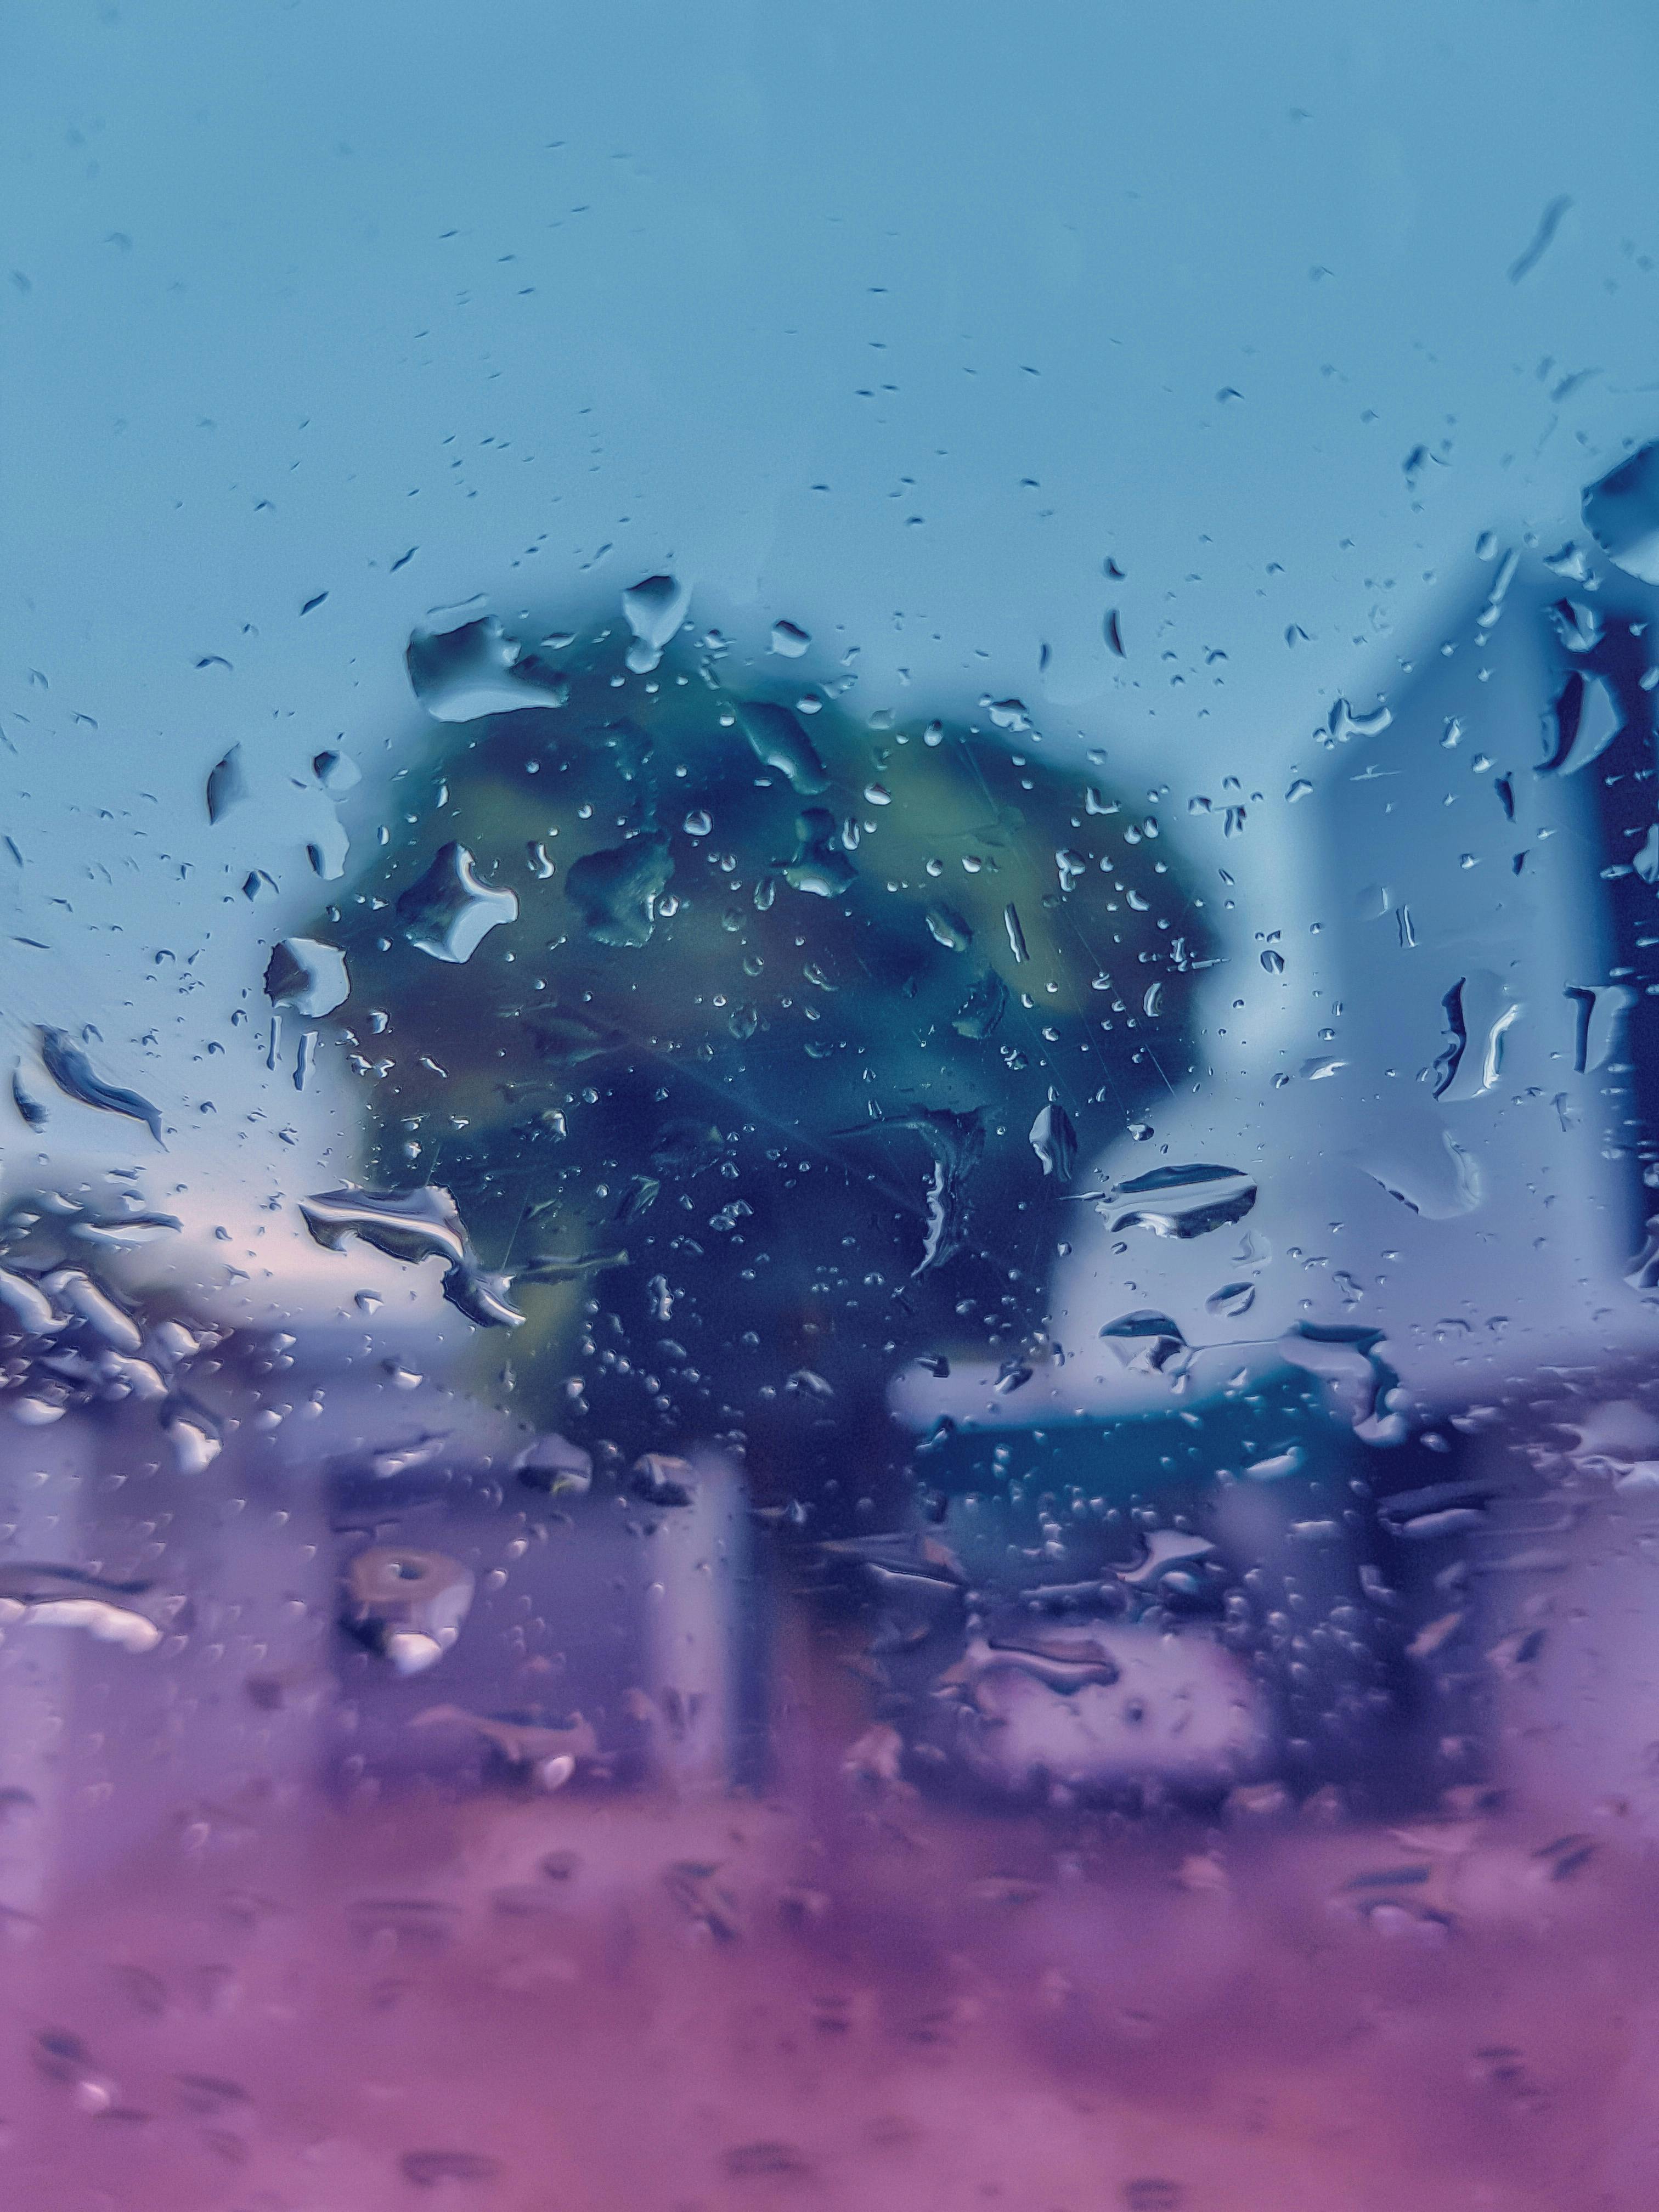 Free stock photo of 4k wallpaper, after the rain, android wallpaper